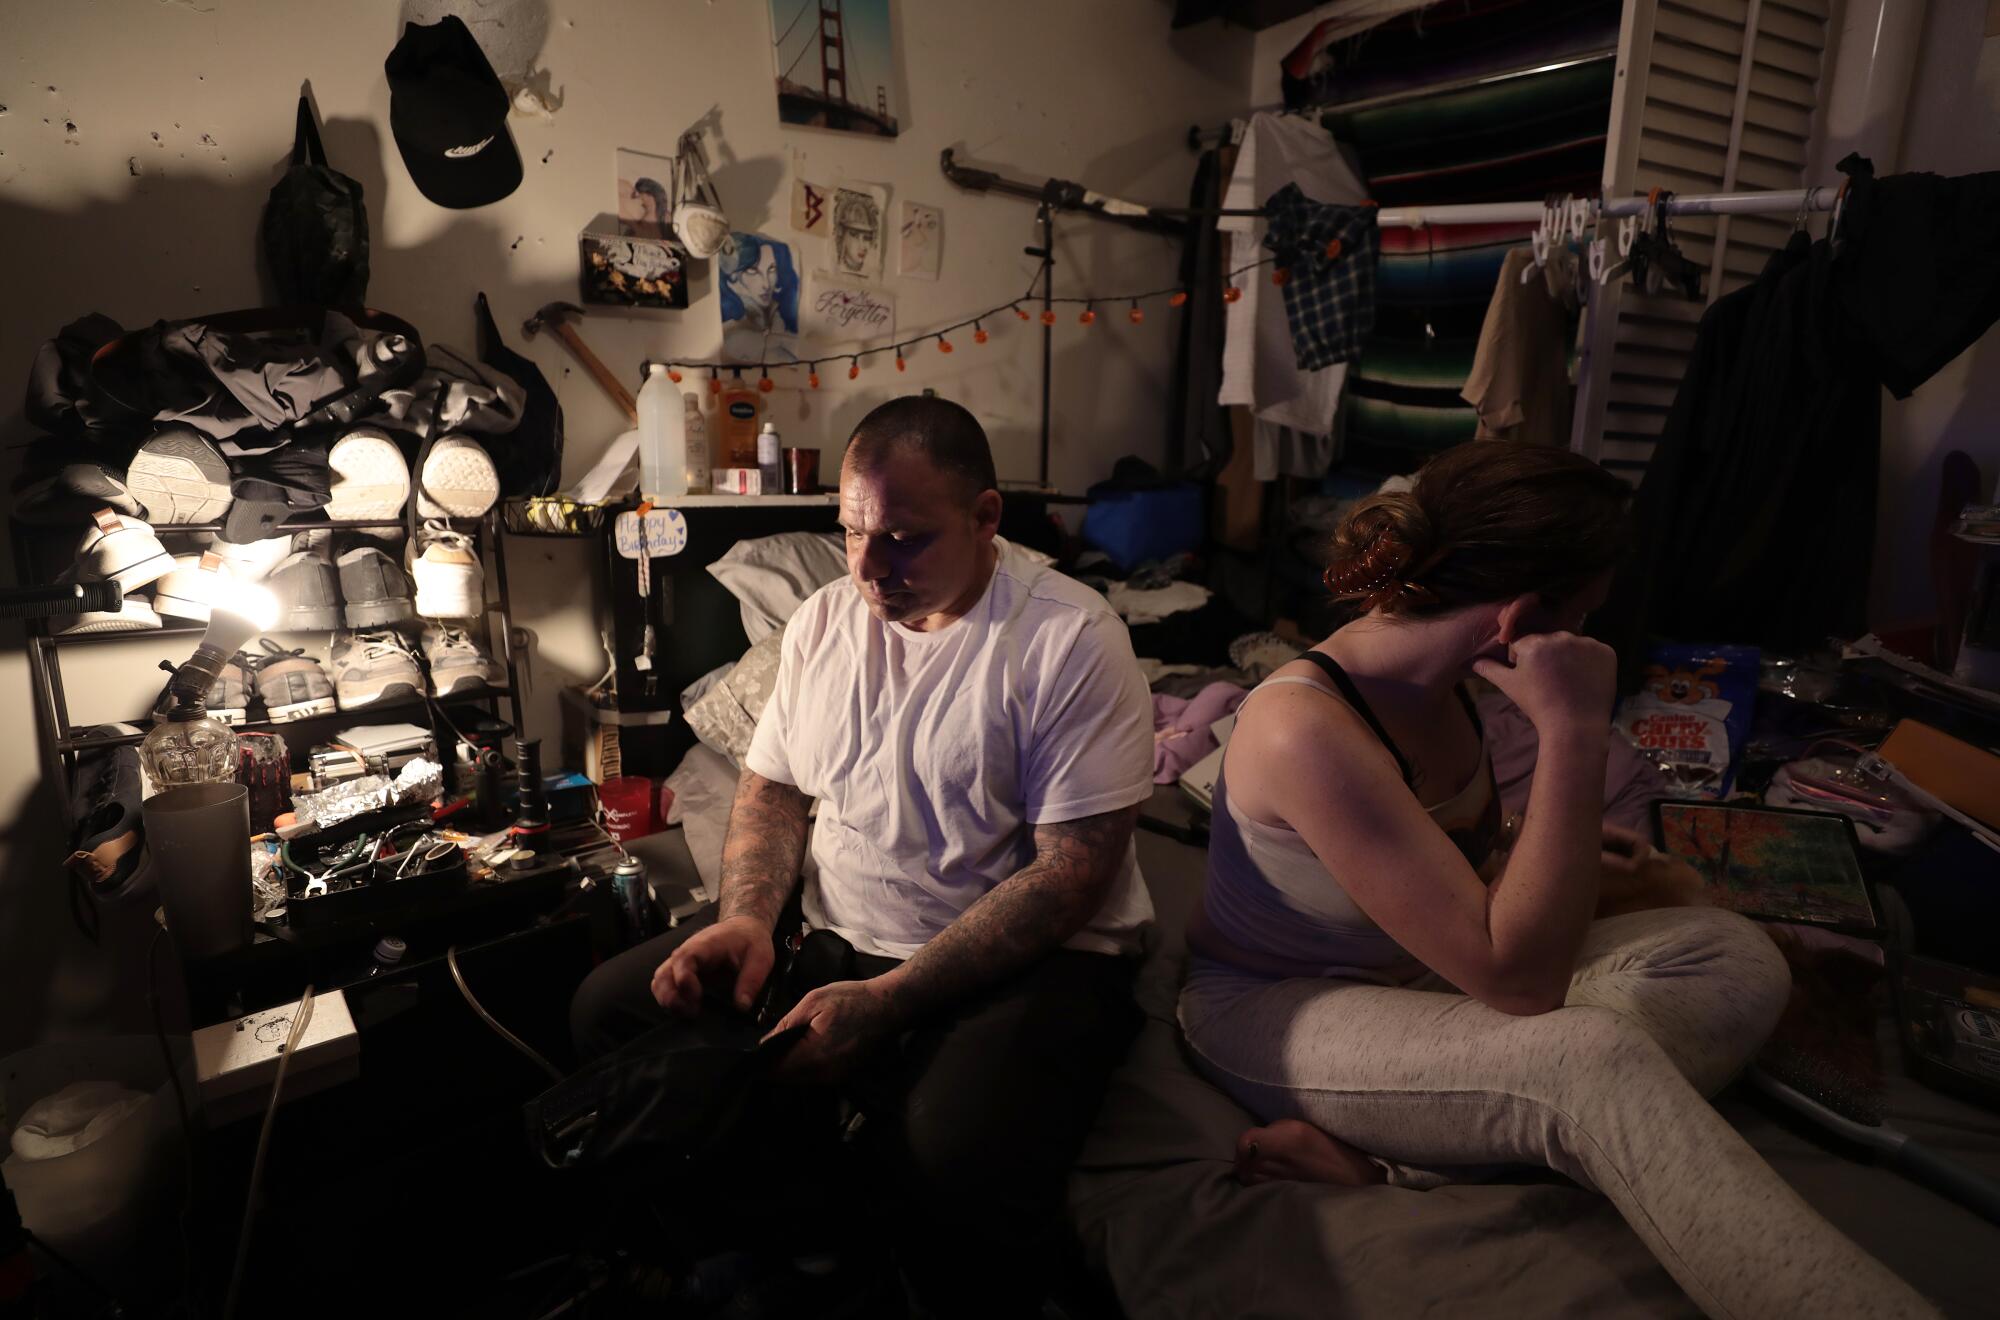 Two people sit in a cluttered room